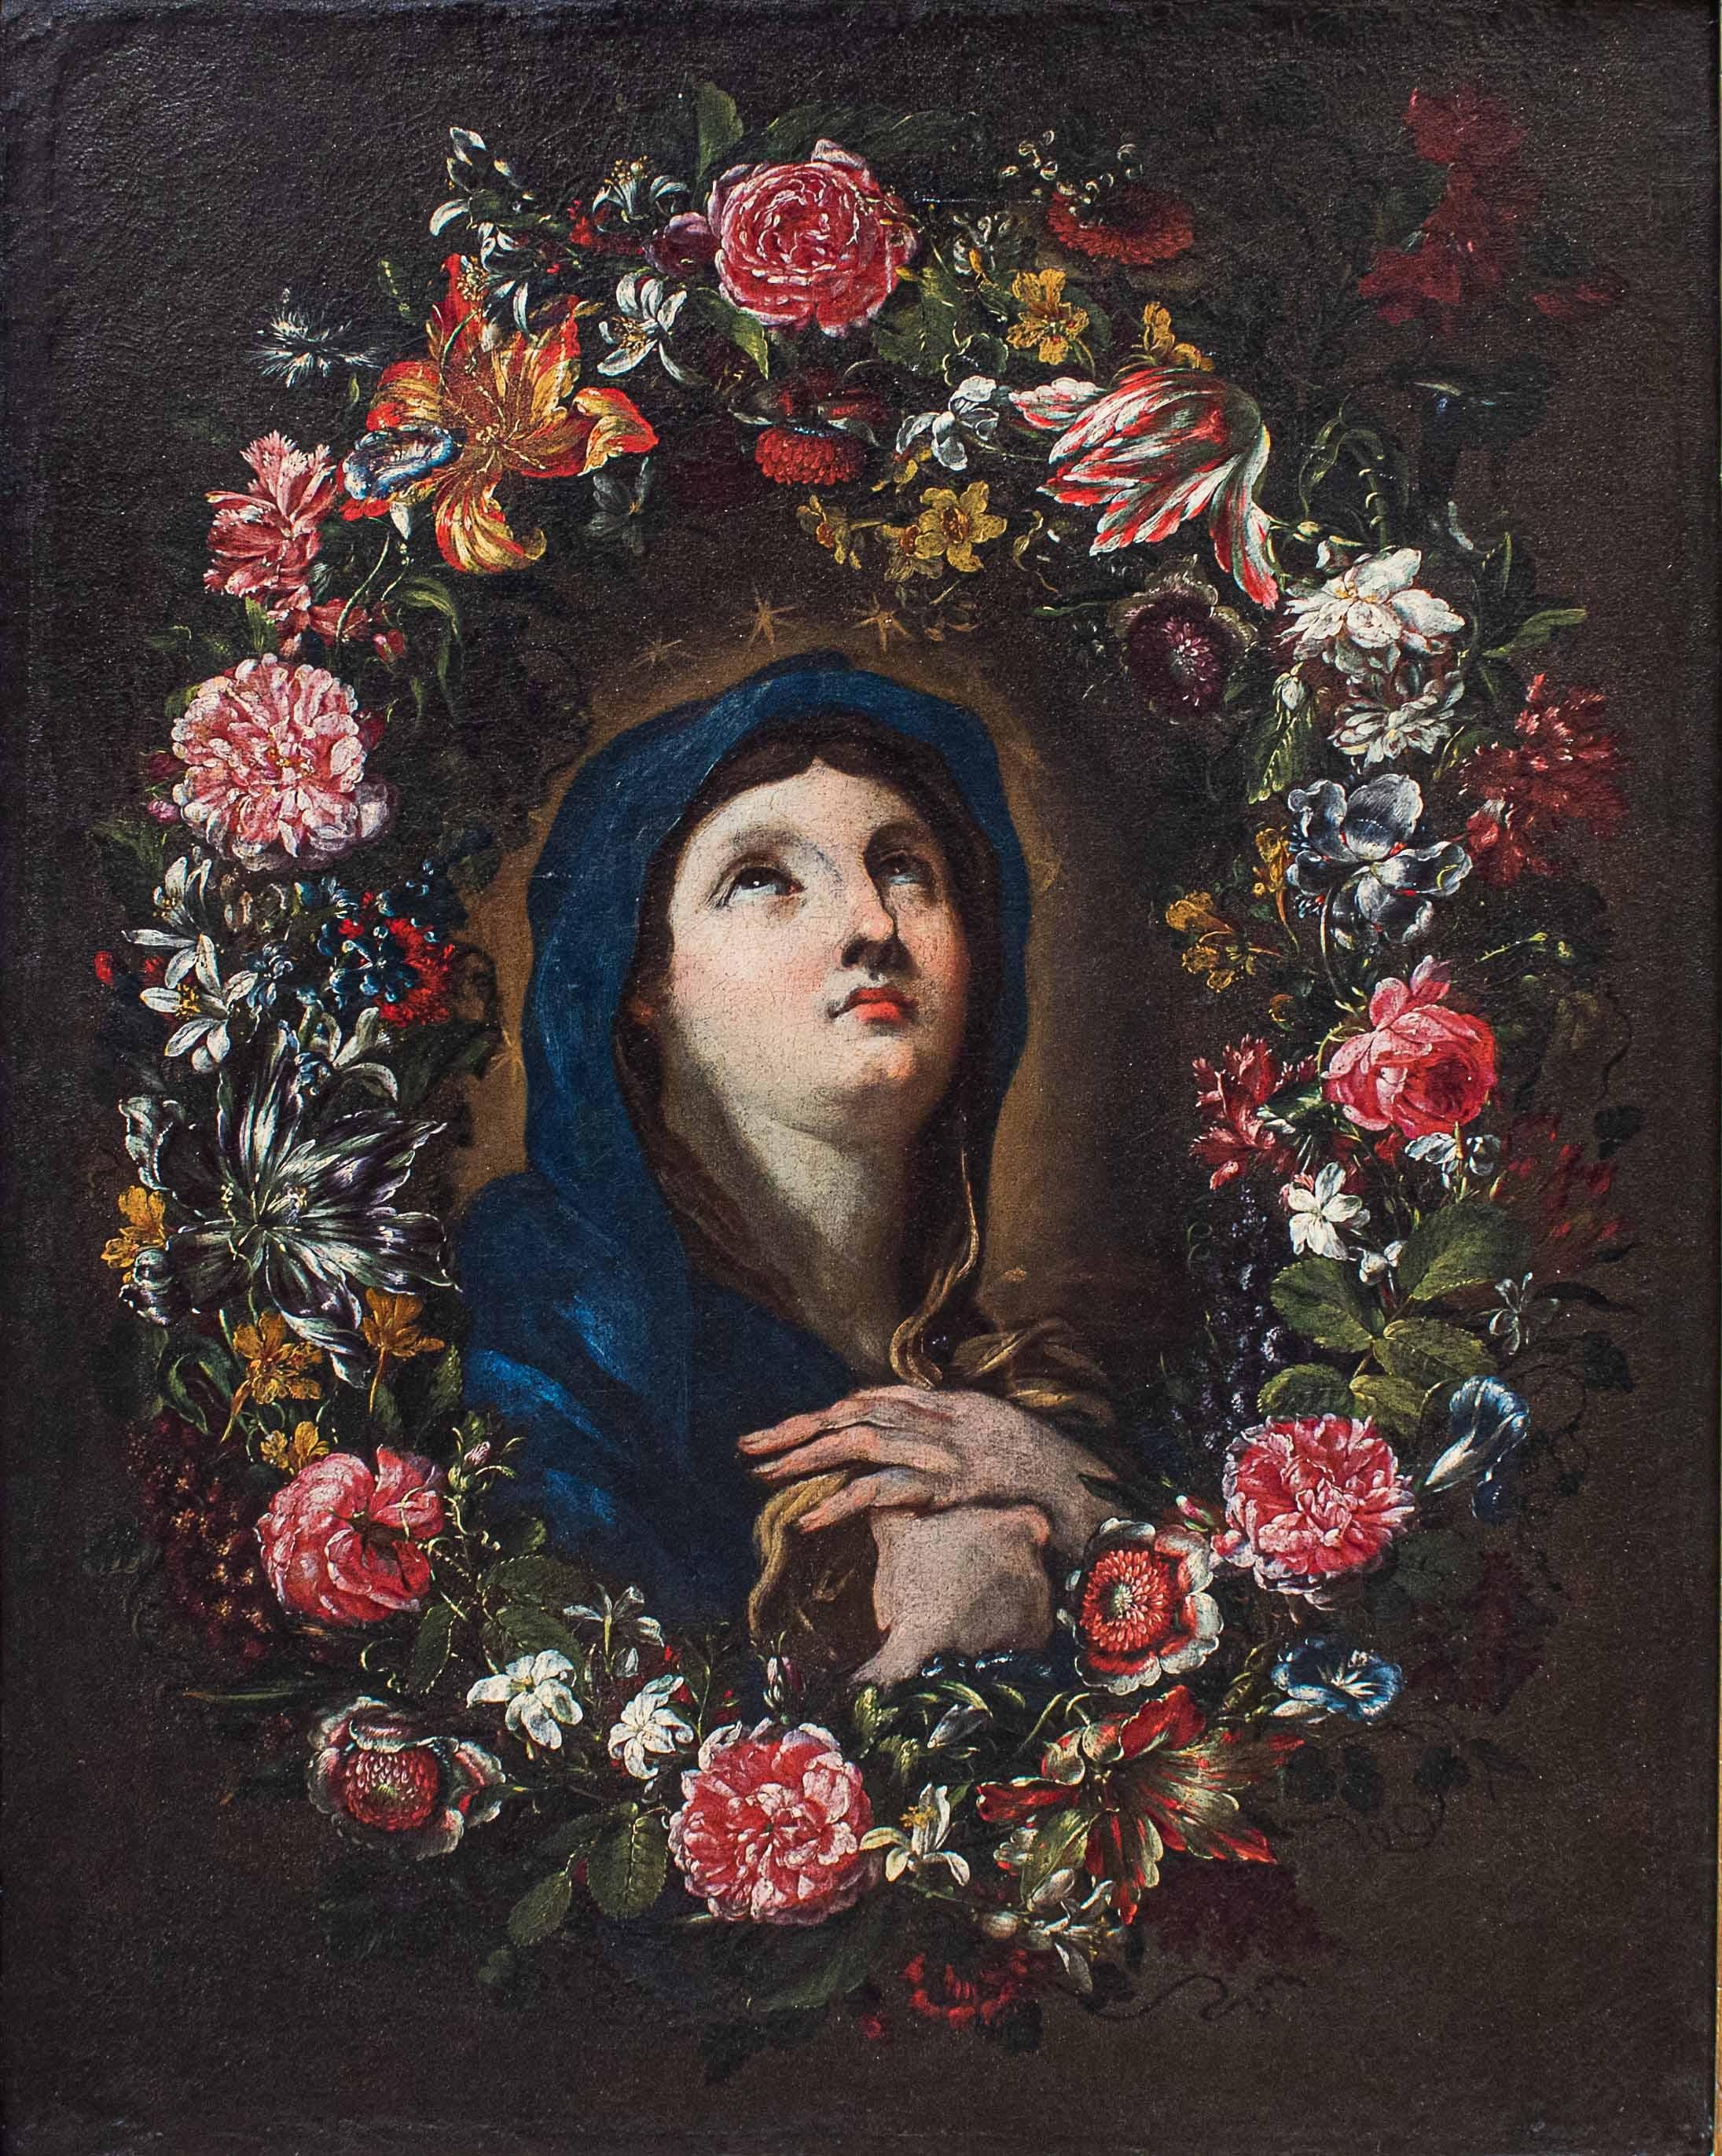 Area of ??Luca Giordano, 17th - 18th century
Virgin Mary within a garland of flowers
Measures: Oil on canvas, 66.5 x 87 cm - with frame, 80 x 100.5 cm

The intimate and delicate canvas in question depicts the illuminated face of the Virgin